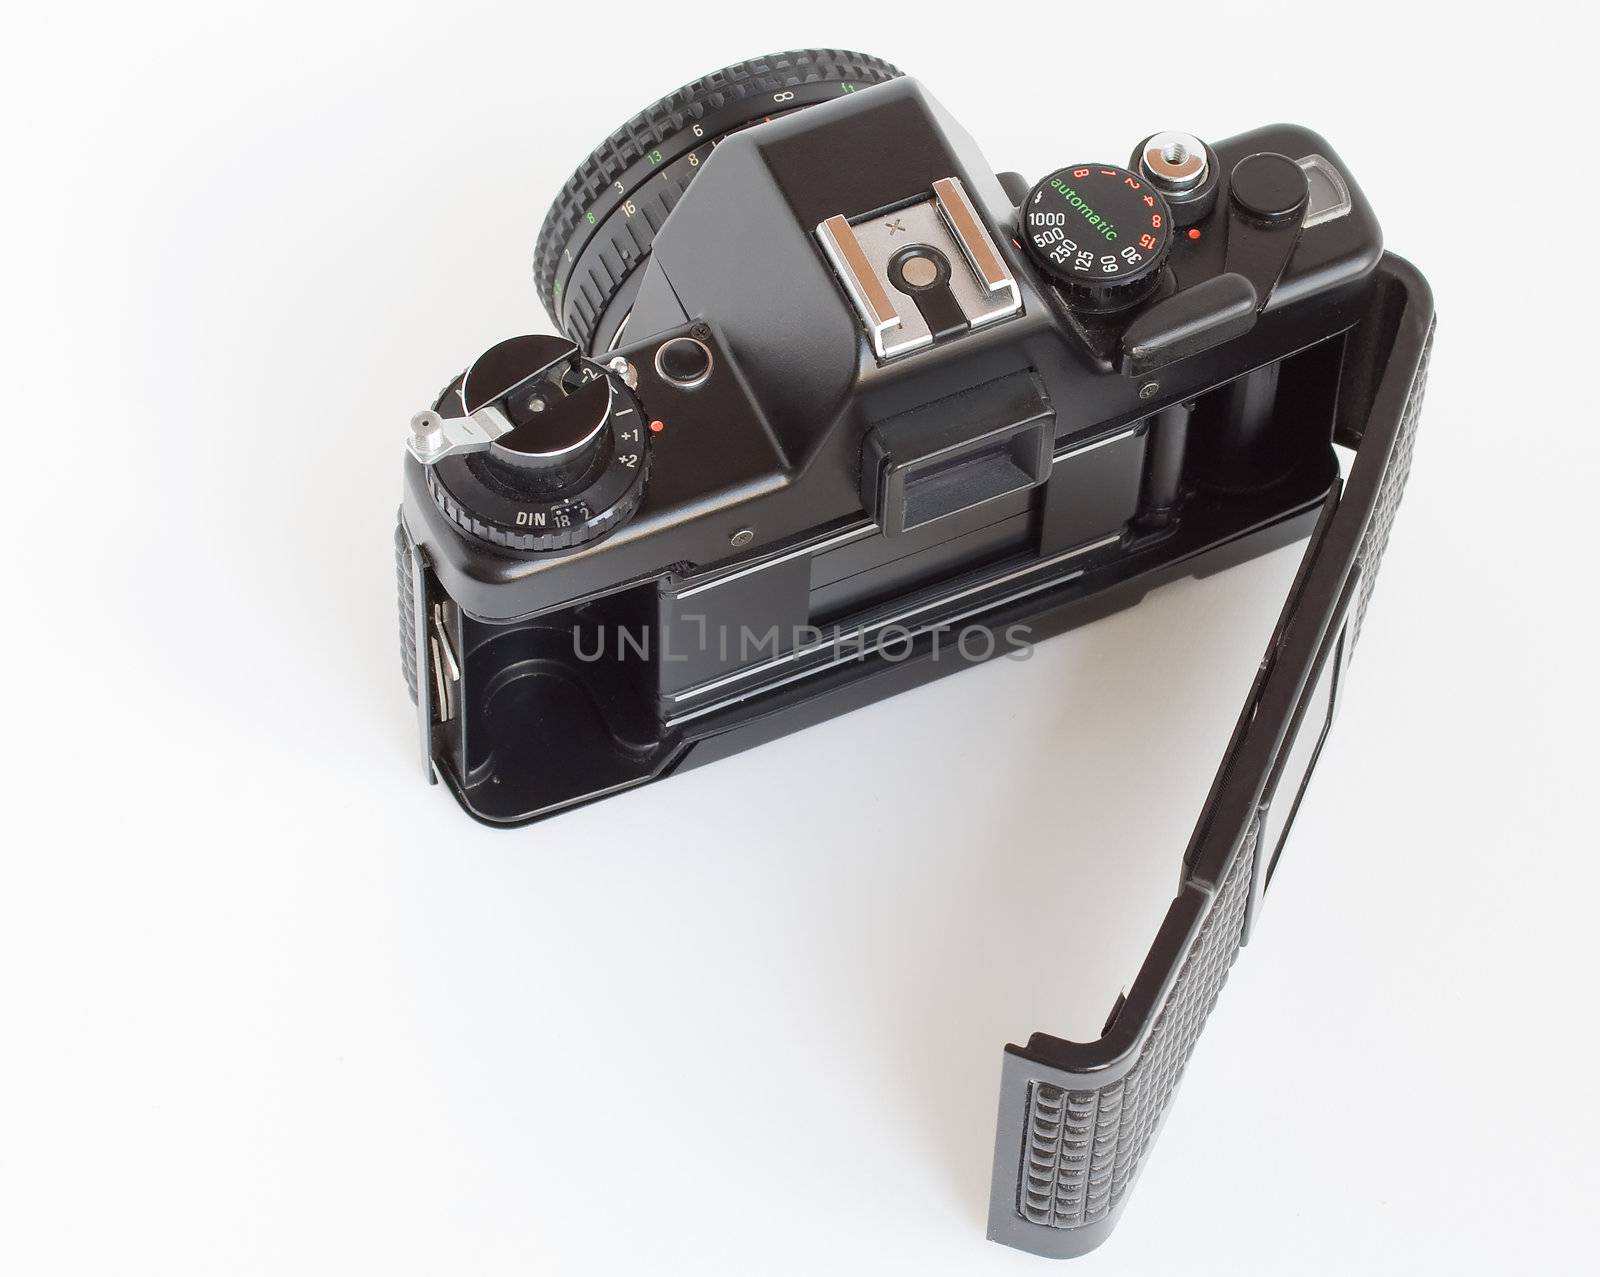 Vintage SLR camera with opened film door over white background